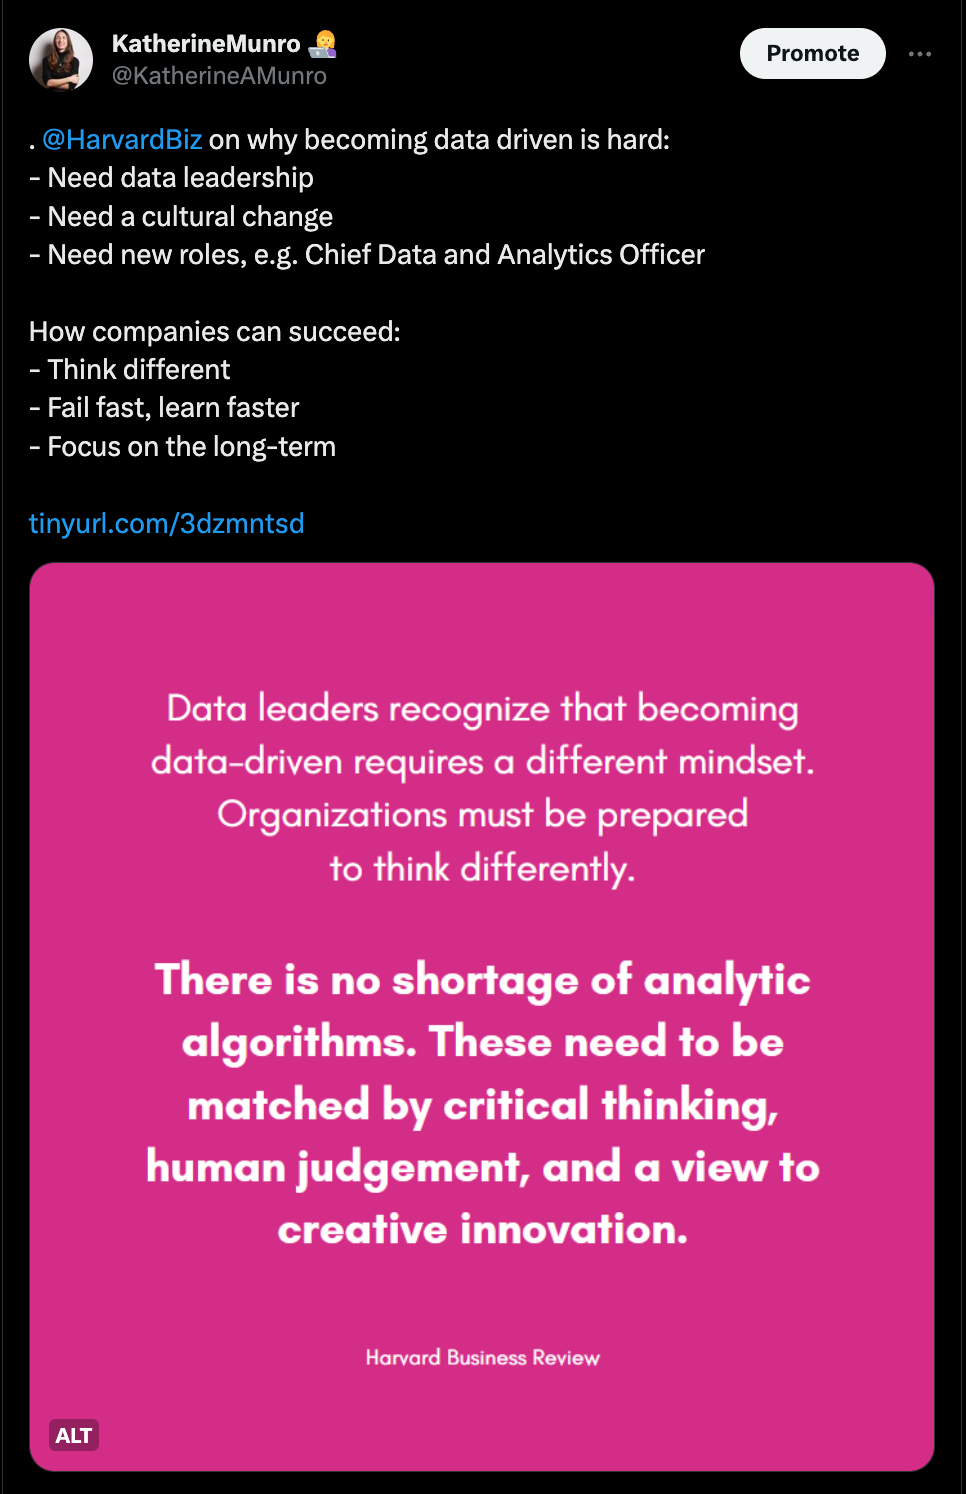 Screenshot of my tweet, which includes the points mentioned above, plus a quote from the linked article: "Data leaders recognize that becoming data-driven requires a different mindset. Organizations must be prepared to think differently. There is no shortage of analytic algorithms. These need to be matched by critical thinking, human judgement, and a view to creative innovation."